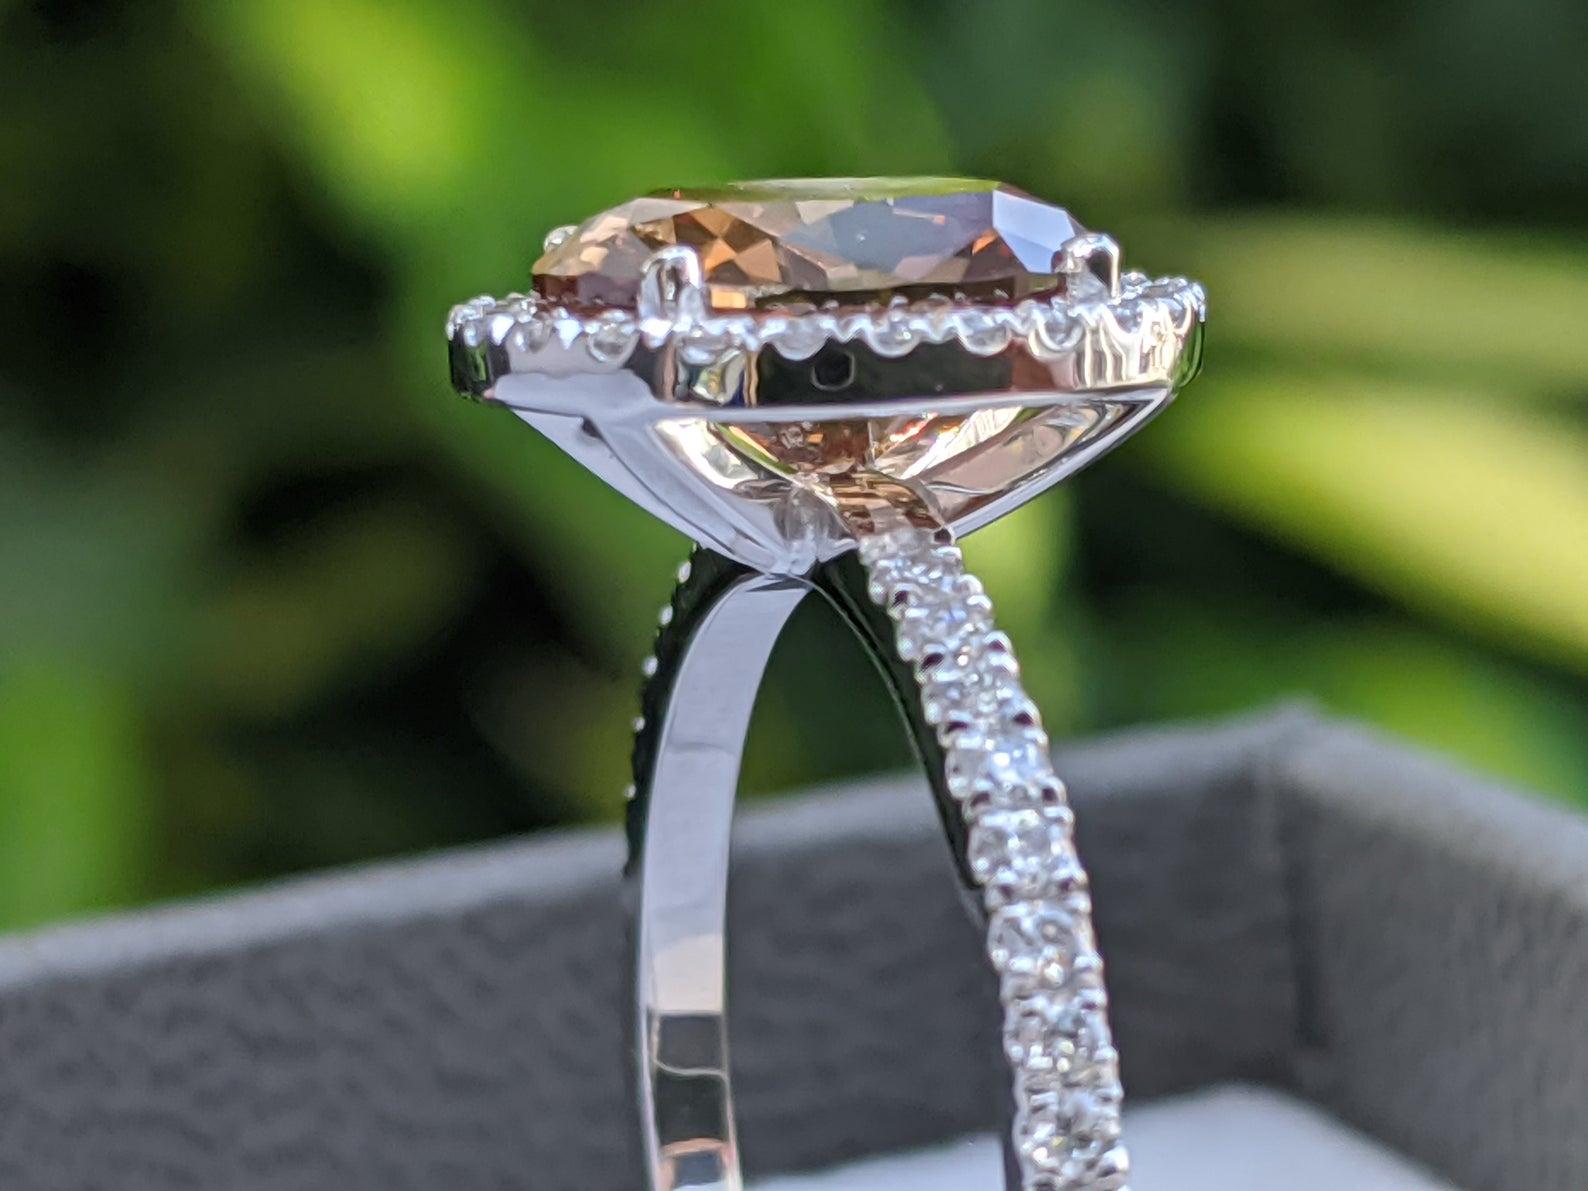 One Of A Kind Engagement Ring Fancy Orangy Brown Certified 2.50 carat Diamond Ring. Set in a sleek, platinum, solitaire ring with a 4-prong setting, this fantastic piece is guaranteed to delight for decades to come! 

Mainstone details:
Main Stone